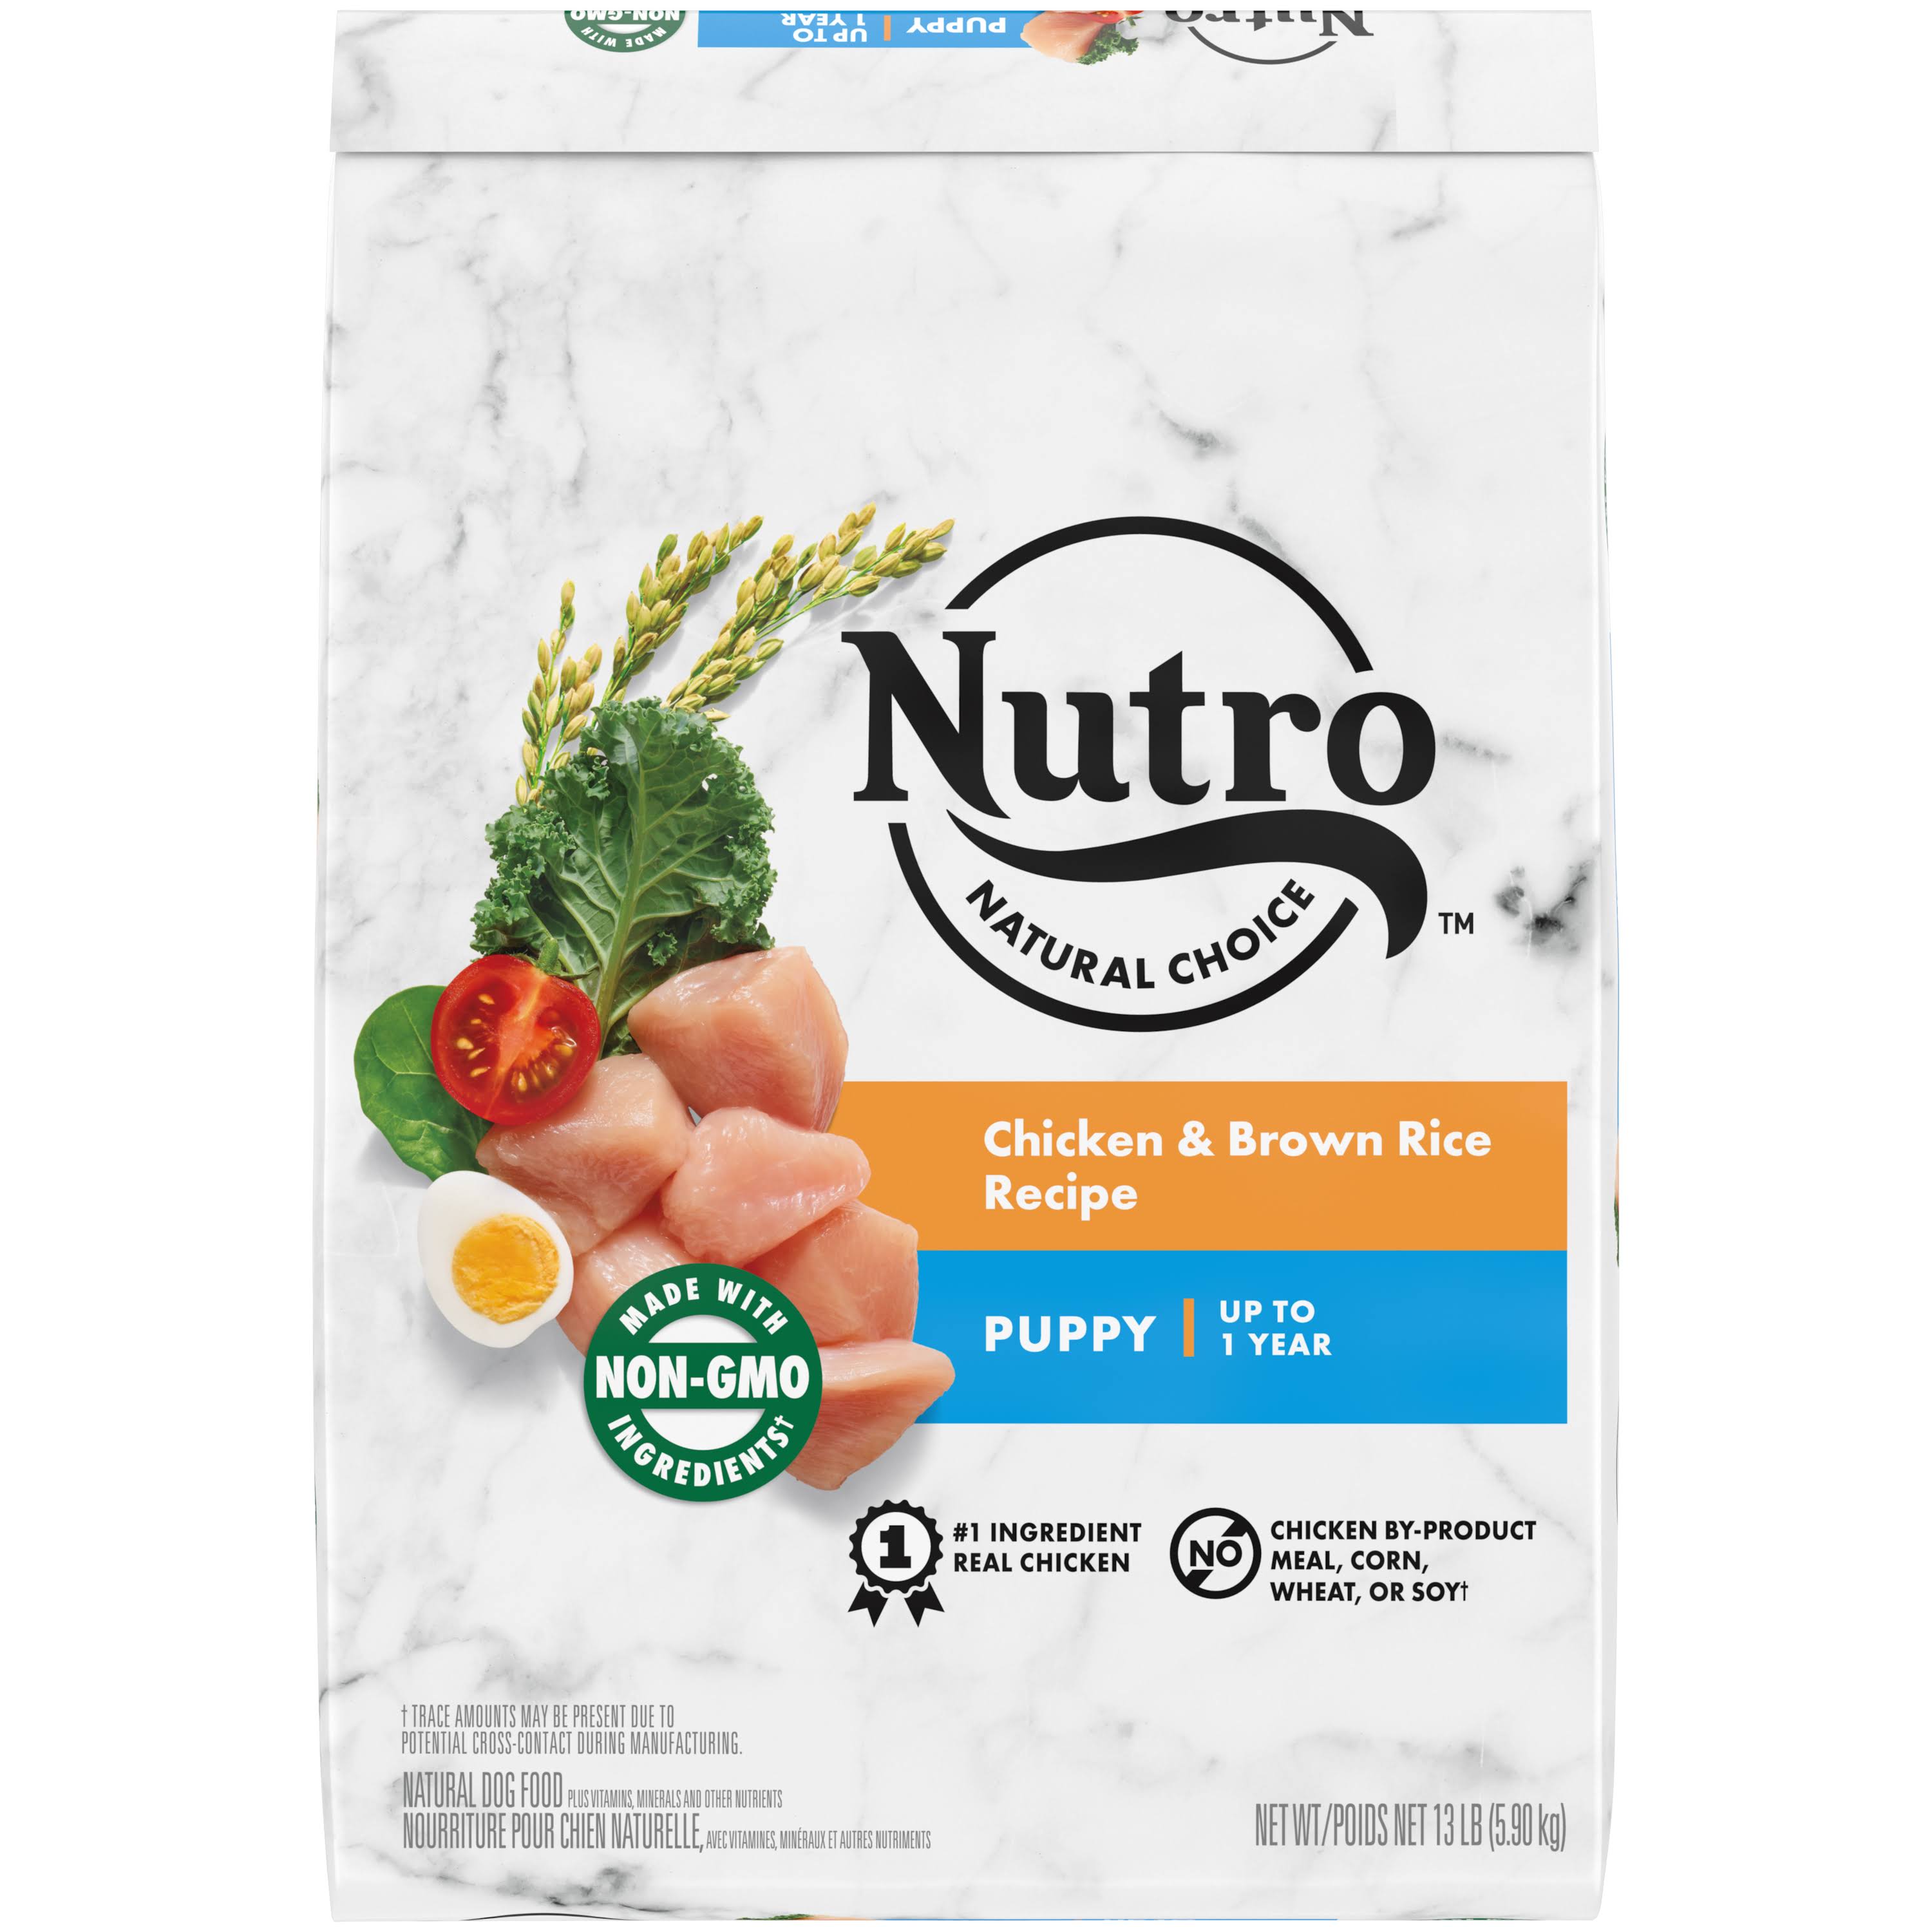 Nutro Natural Choice Dog Food, Natural, Chicken & Brown Rice Recipe, Puppy - 13 lb